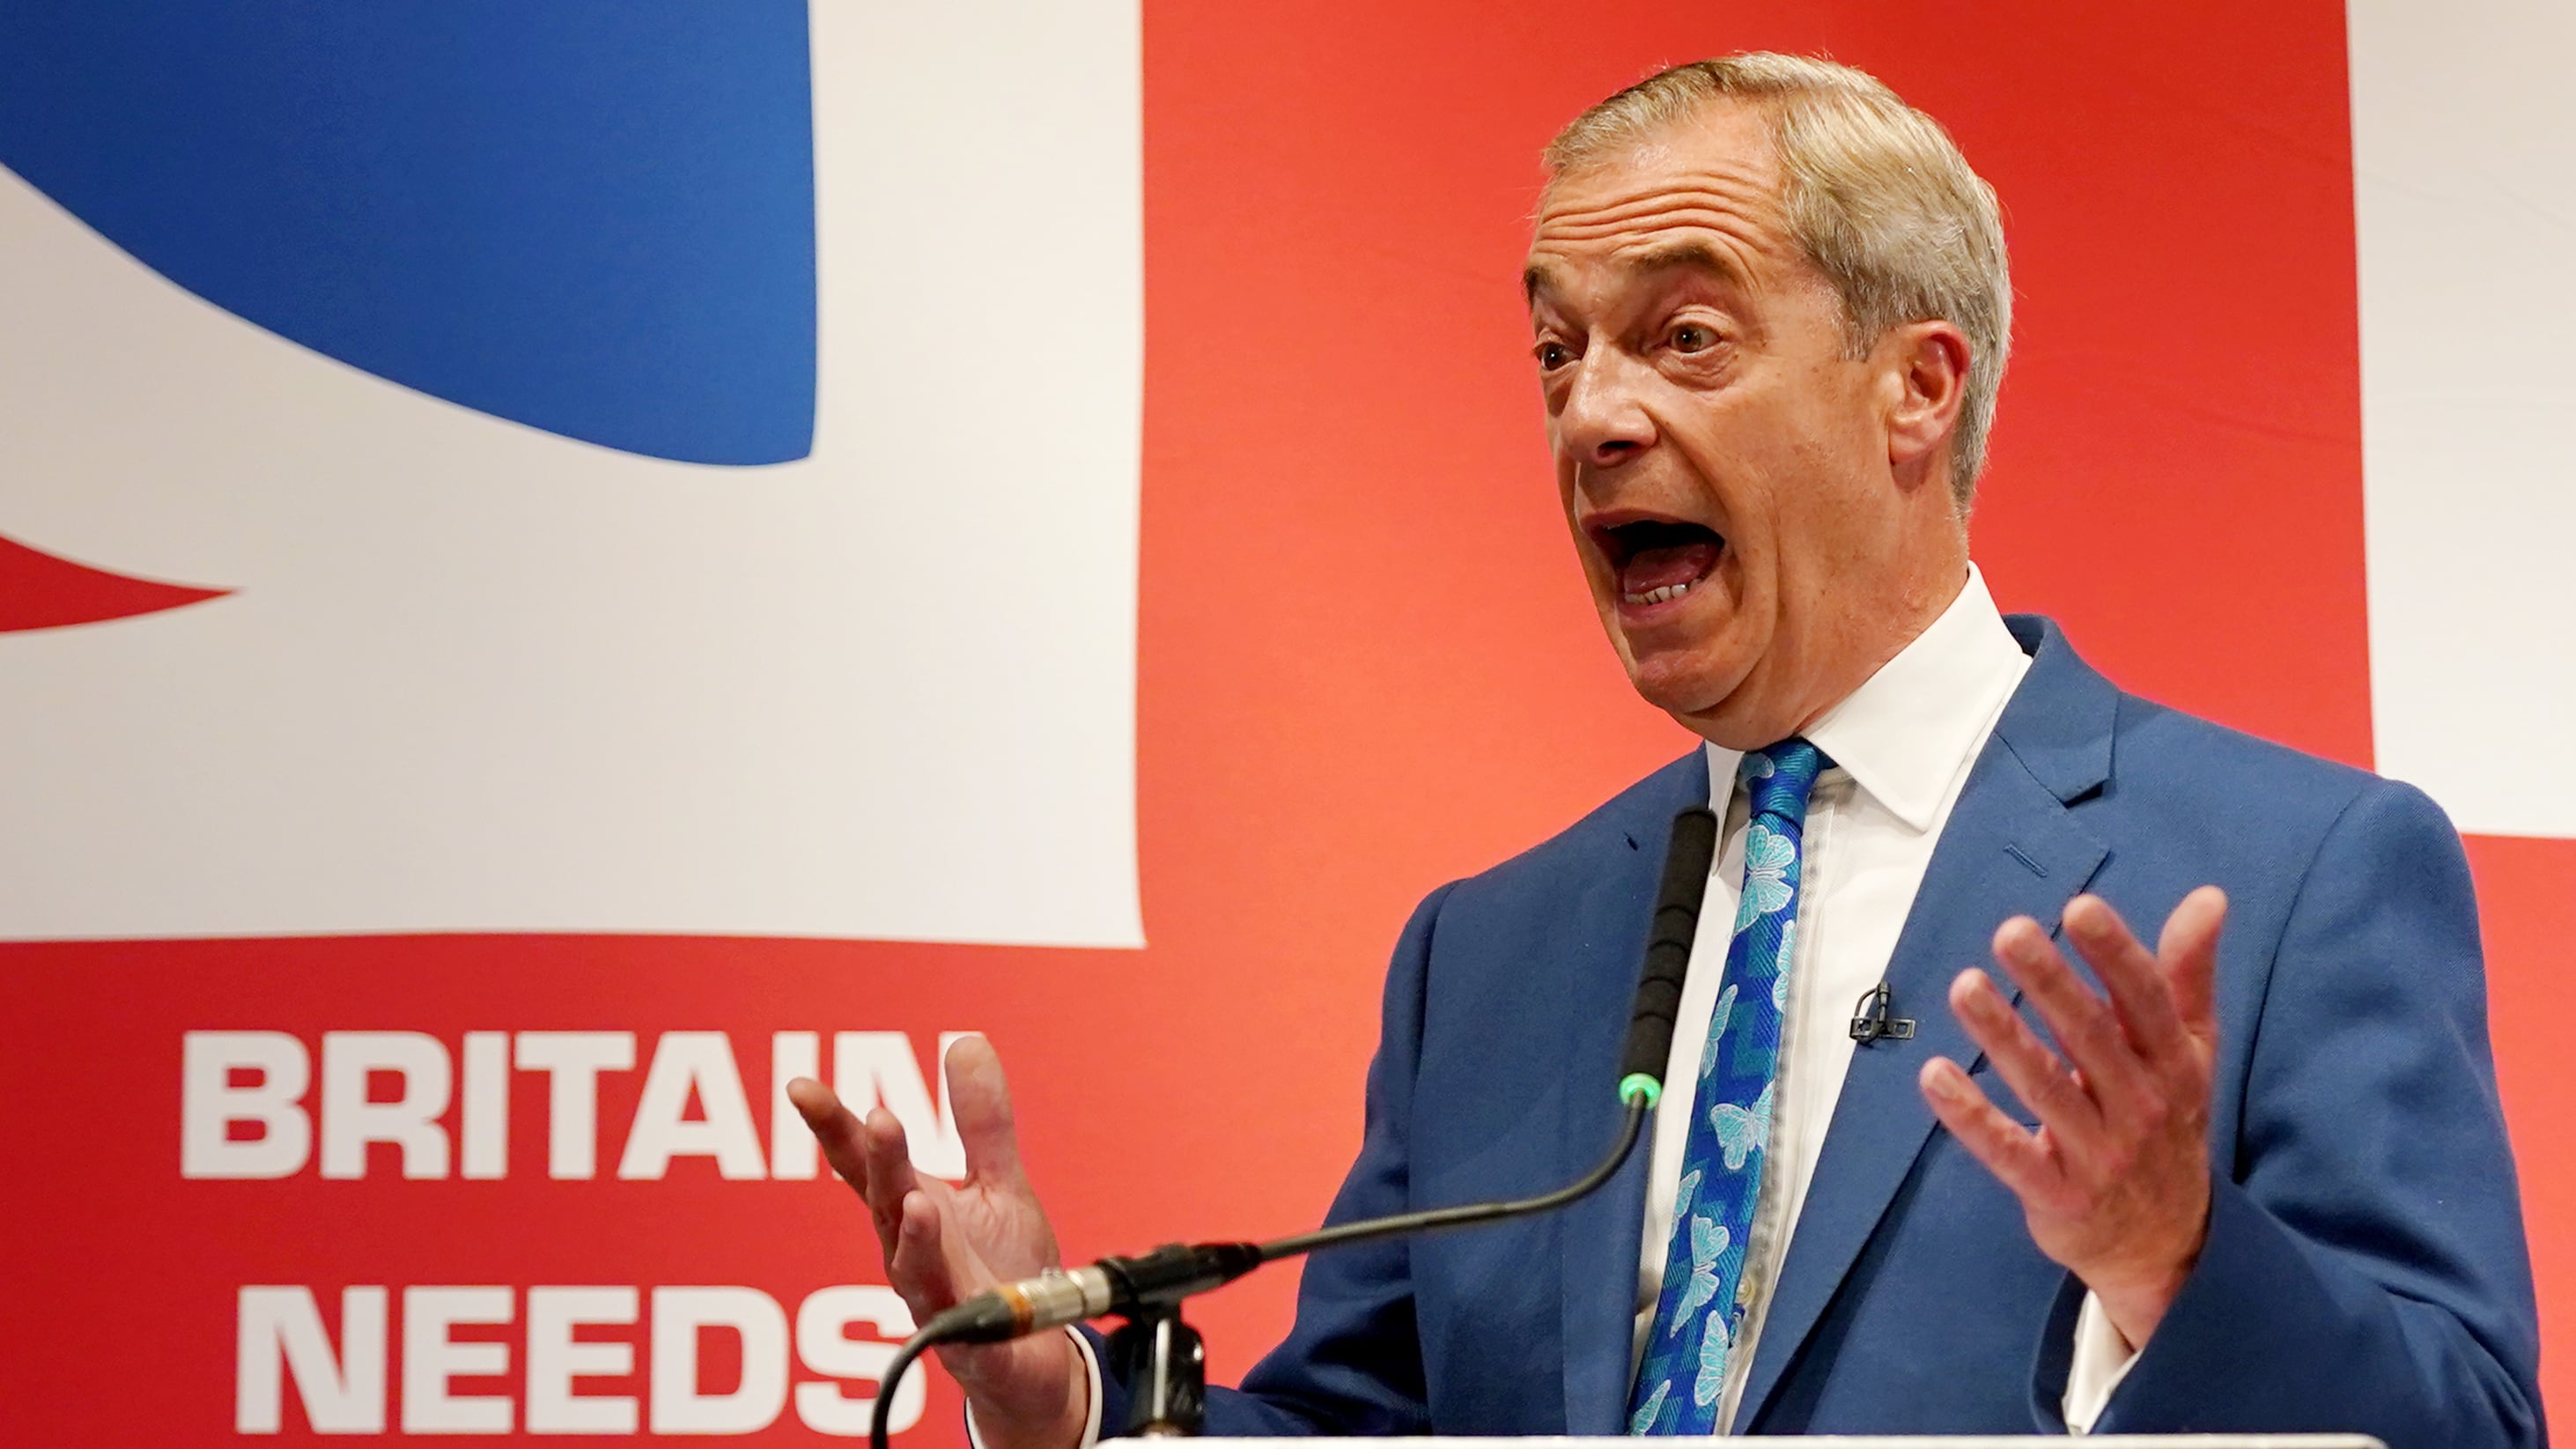 Nigel Farage during a press conference to announce that he will become the new leader of Reform UK